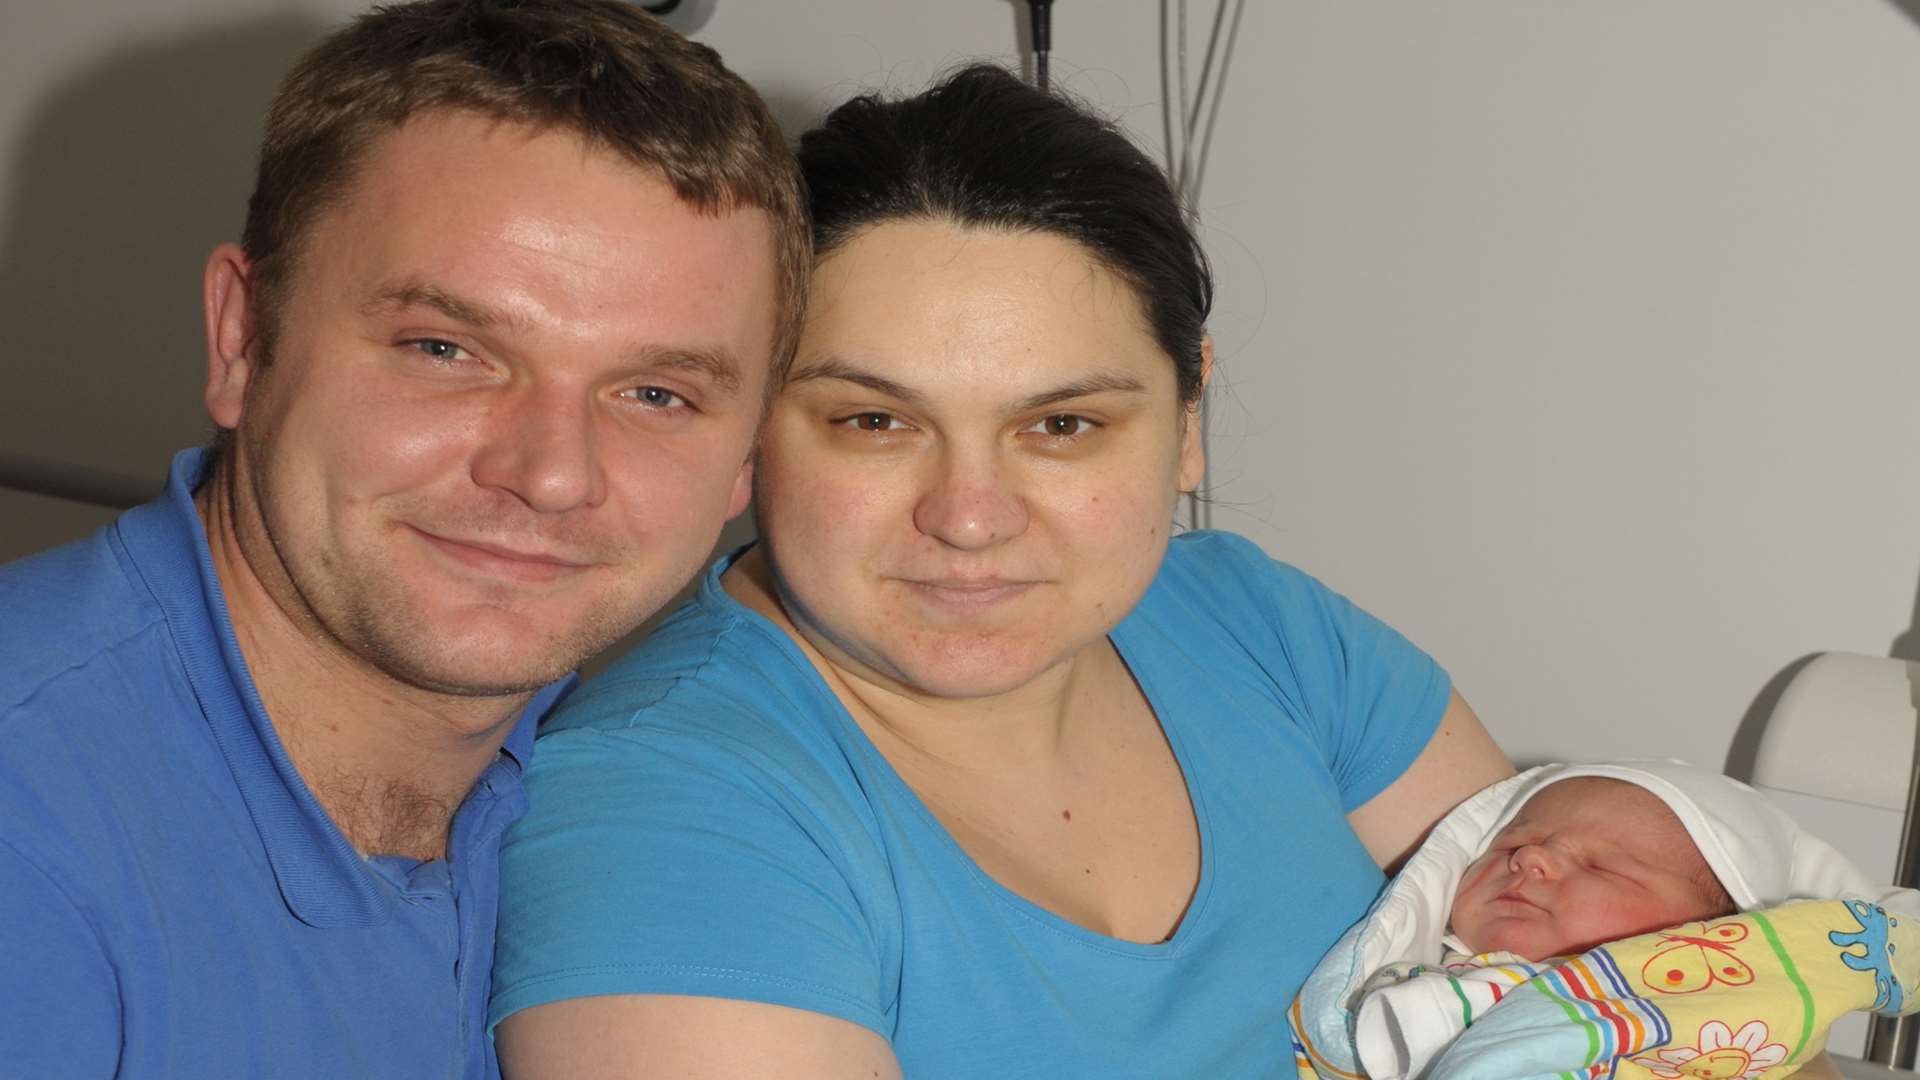 Baby Kacper, born just before the New Year's Day celebrations at the Tunbridge wells Hospital at Pembury